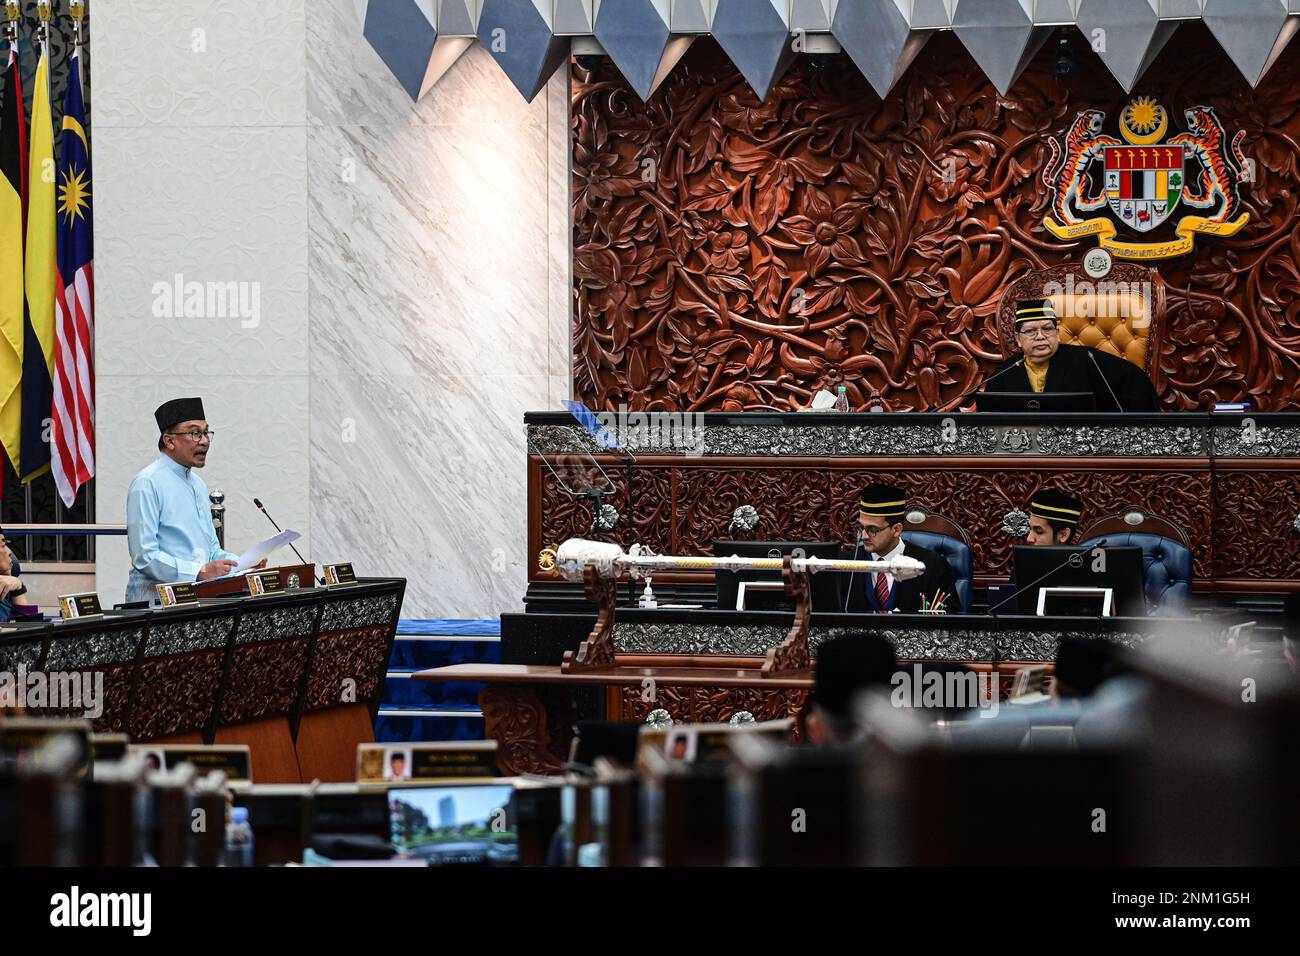 (230224) -- KUALA LUMPUR, Feb. 24, 2023 (Xinhua) -- Malaysian Prime Minister Anwar Ibrahim (L, stand) proposes the national budget at the parliament house in Kuala Lumpur, Malaysia, Feb. 24, 2023. The Malaysian government led by Prime Minister Anwar Ibrahim on Friday proposed a 388.1 billion ringgit (87.5 billion U.S. dollars) national budget aimed at helping the country resolve a number of domestic issues. Anwar, who is also the finance minister, said the budget will focus on addressing the high cost of living, further strengthening the social safety net and enhancing the micro, small and m Stock Photo